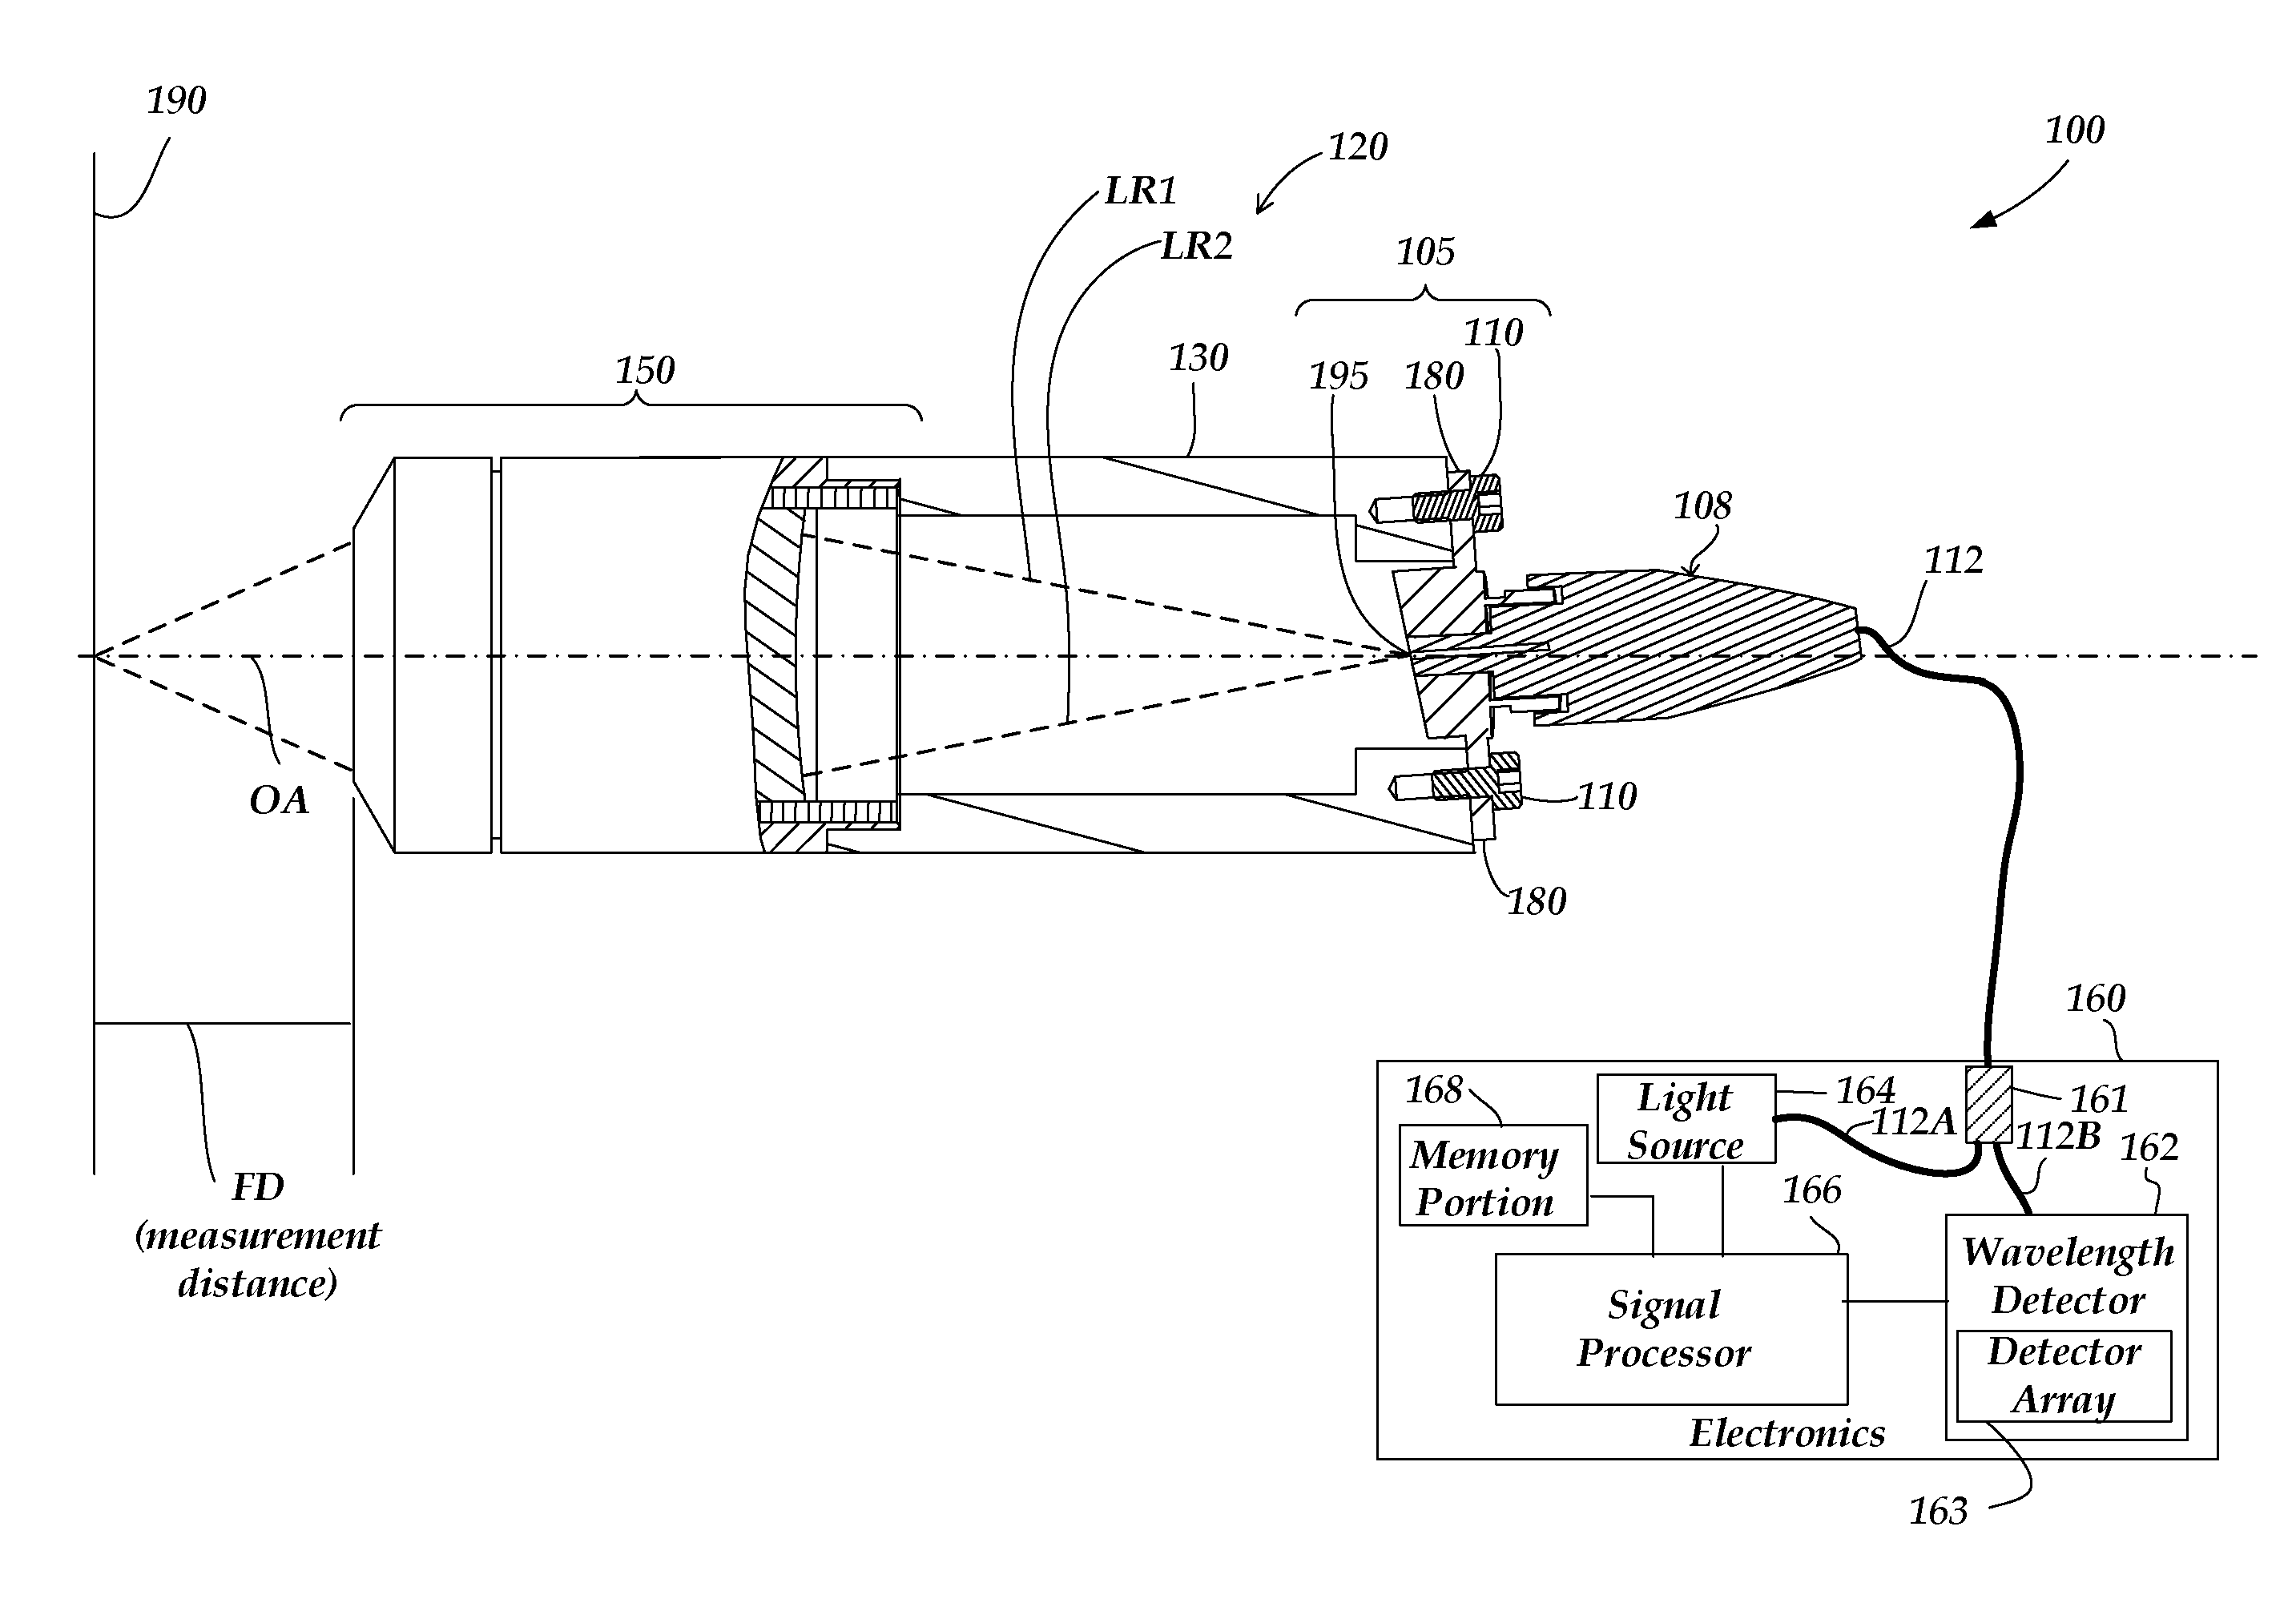 Phosphor wheel configuration for high intensity point source